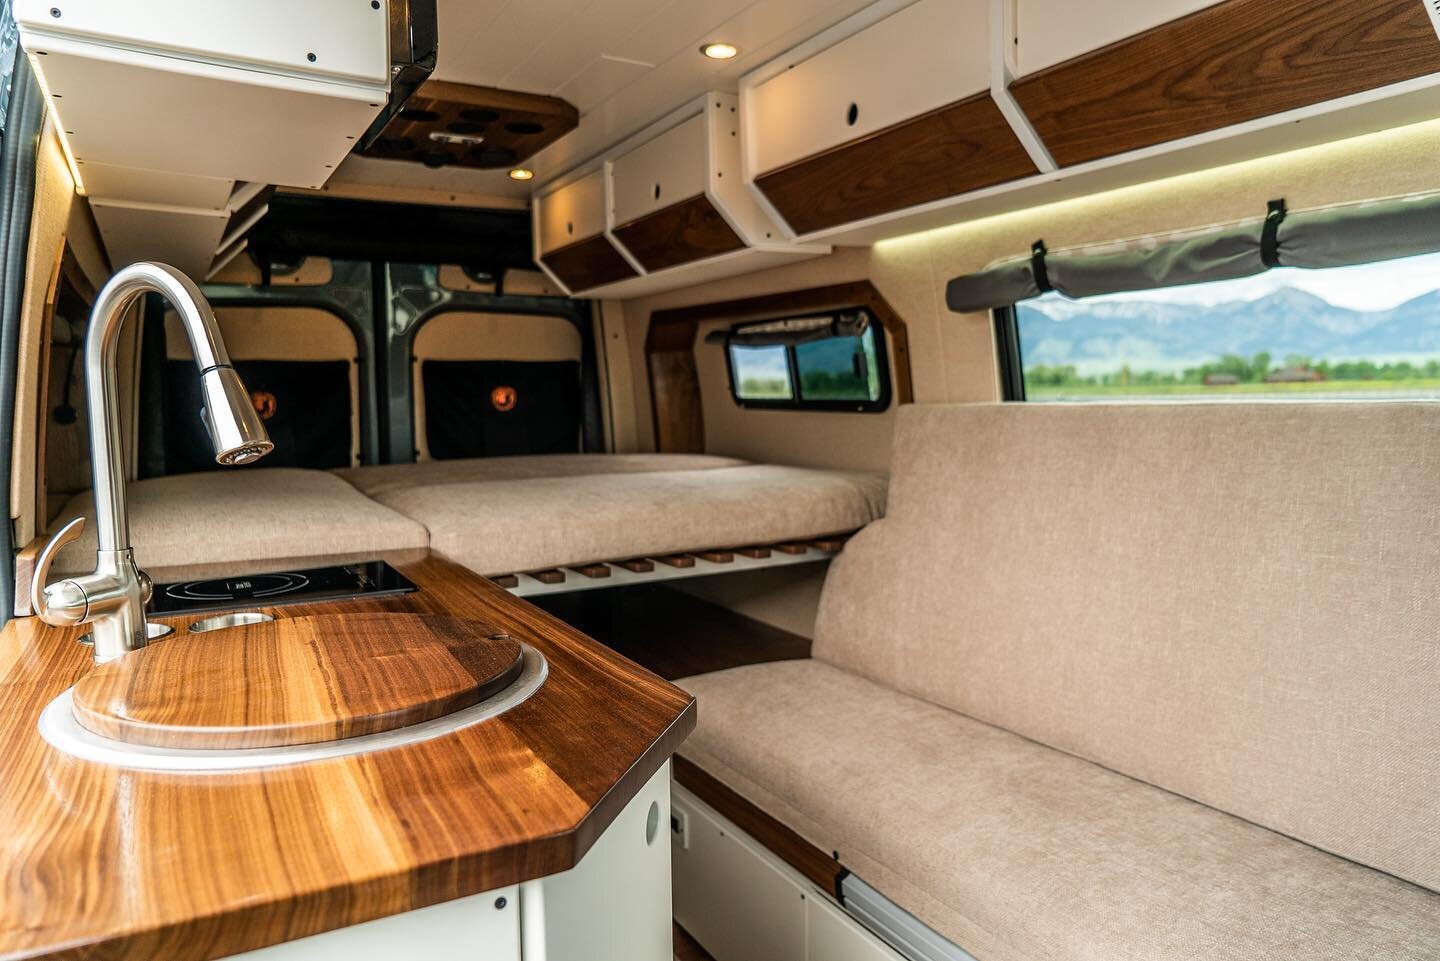 Did you know you can fit two beds, a lounge space, and a full kitchen in a 144&rdquo; Sprinter conversion? We didn&rsquo;t either until we made it happen! Meet First Class, the latest custom build from BTV. Beautiful walnut trim paired with a bright 